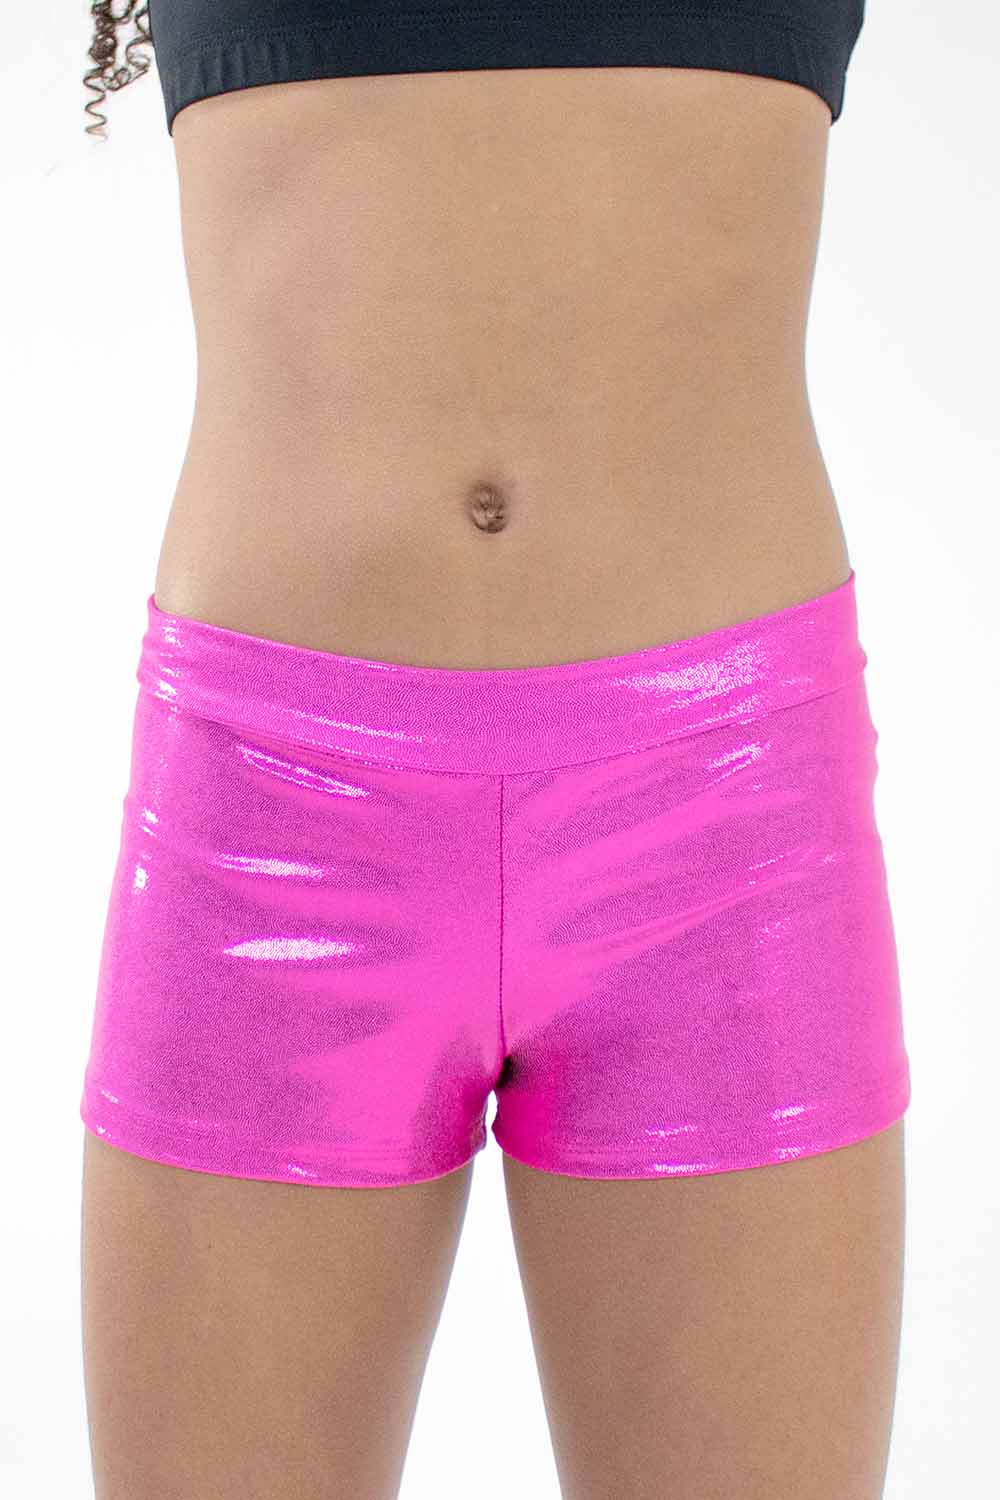 Girls Large and Womens X-Small Spandex Shorts 4 Inseam - Metallic Royal  Blue